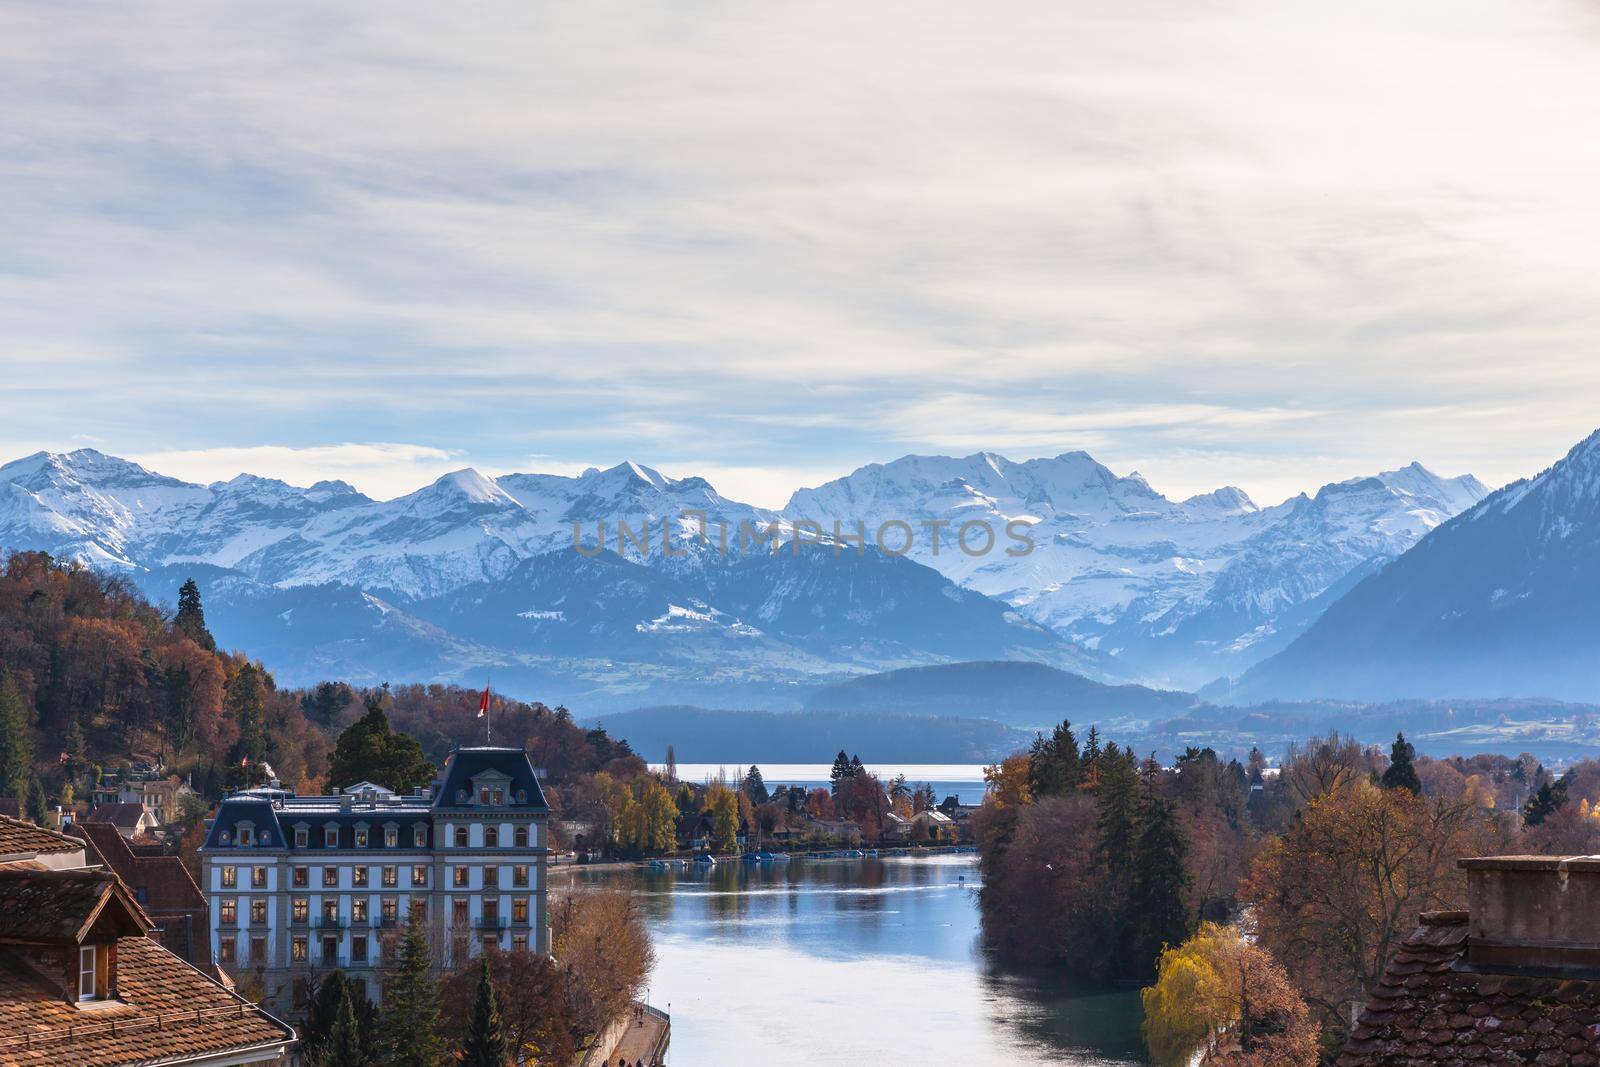 Stunning view of the Thun city and lake of Thun from the Thun castle with the snow covered peaks of Alps in background, Canton of Bern, Switzerland